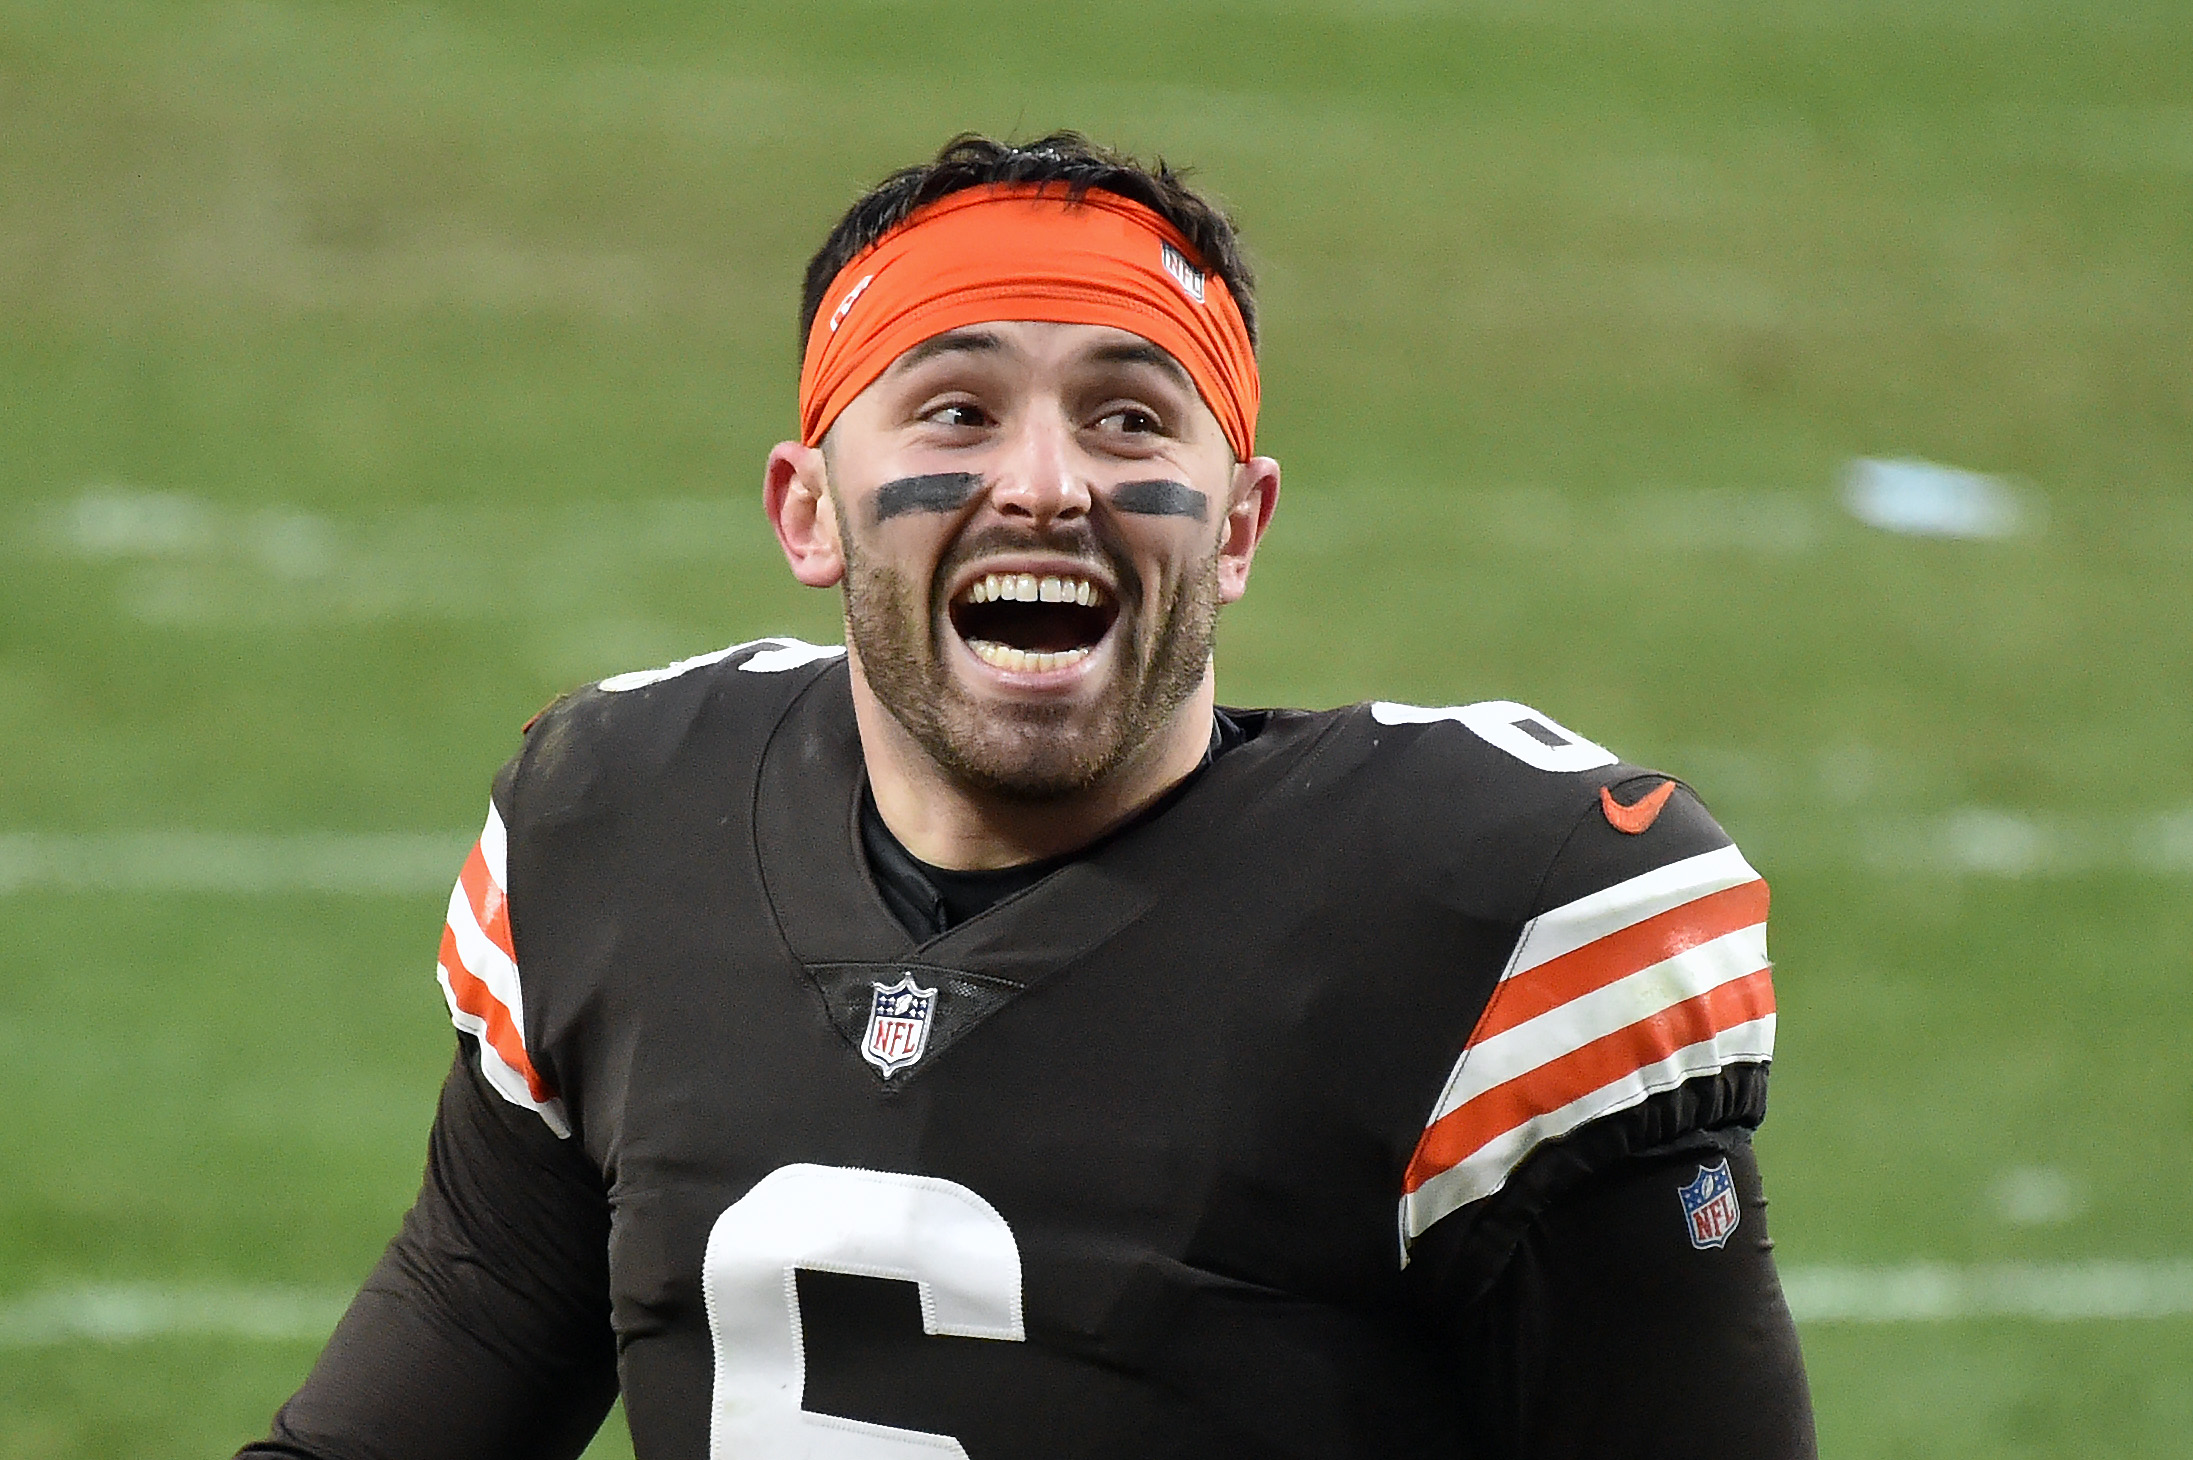 Bettors are loving the Baker Mayfield MVP odds for 2021. The Cleveland Browns QB is seen here celebrating a 2020 victory over the Steelers.